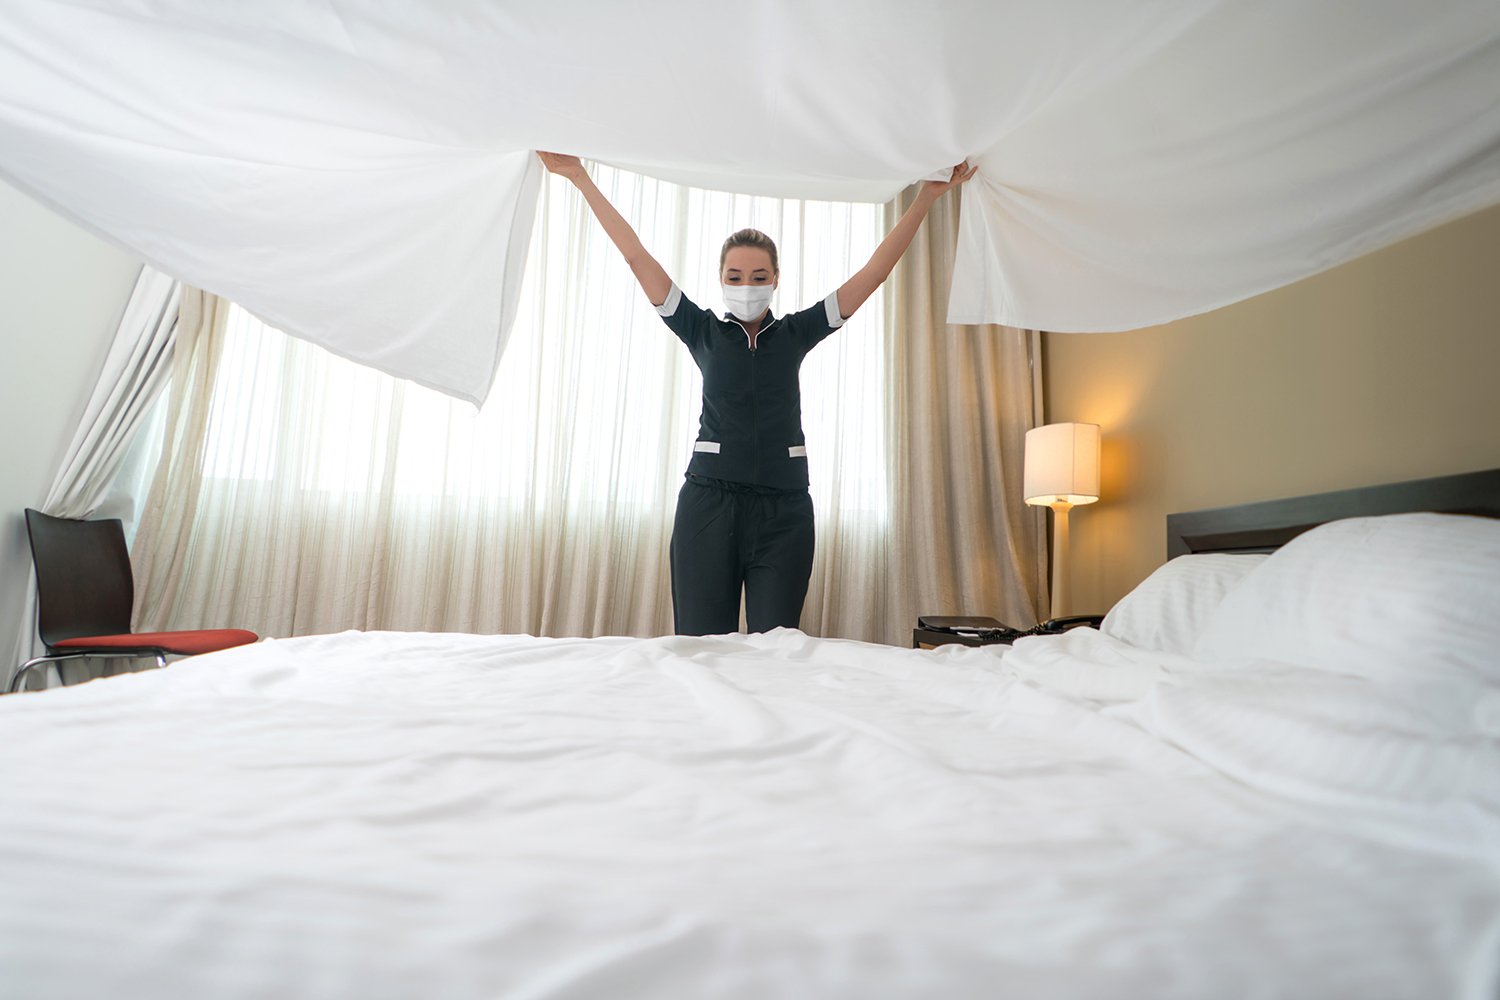 https://www.themanual.com/wp-content/uploads/sites/9/2021/01/how-clean-are-hotel-bed-sheets-2021.jpg?fit=1500%2C1000&p=1